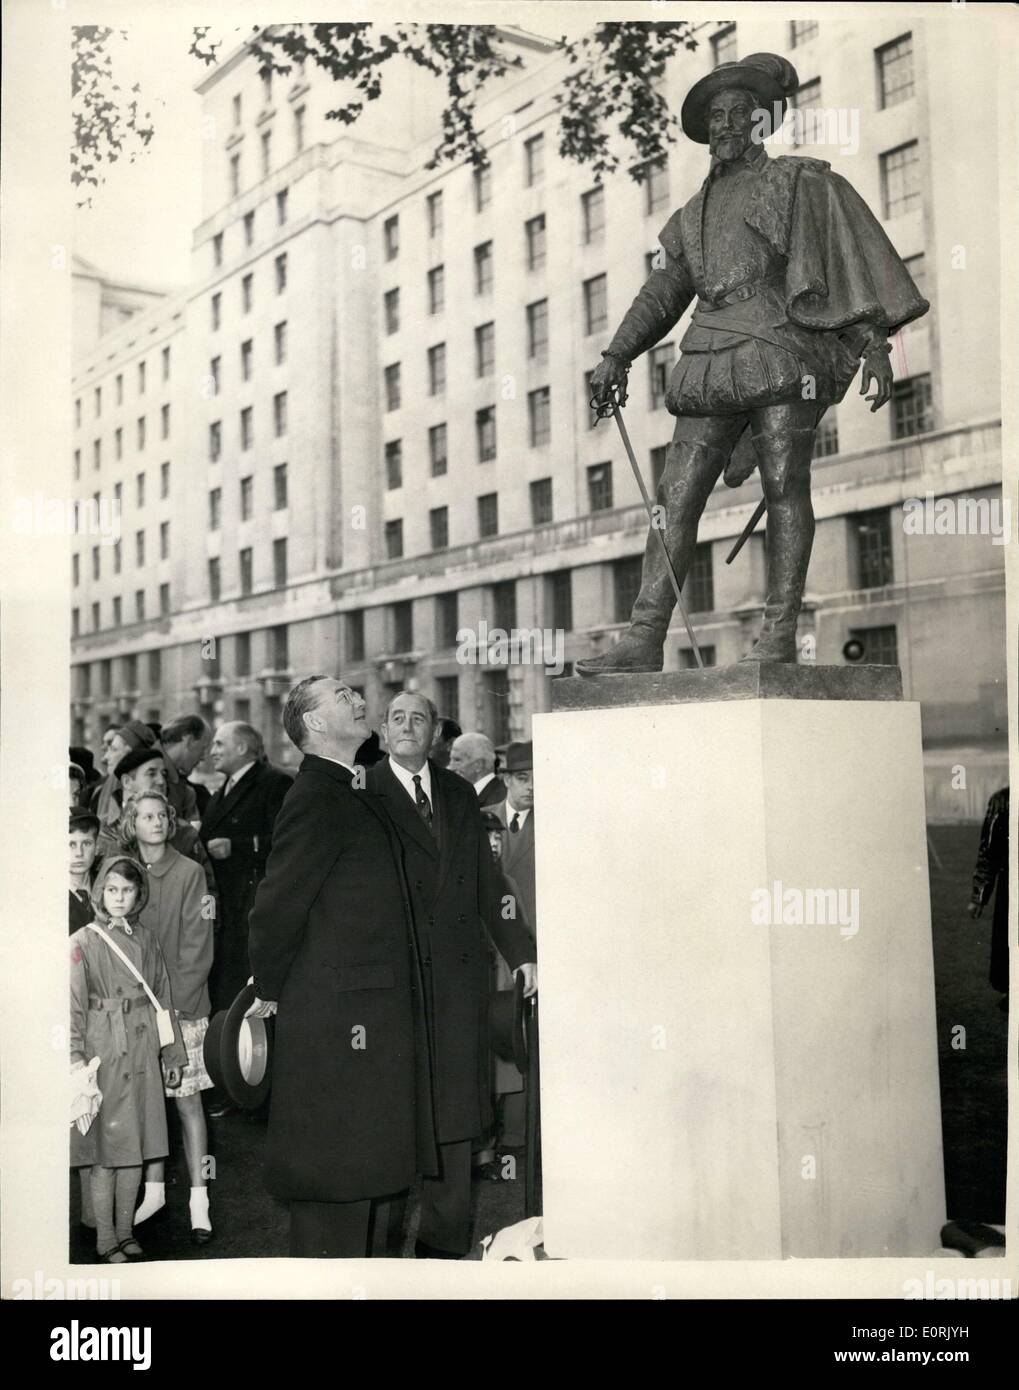 Oct. 10, 1959 - Sir Walter Raleigh Statue Unveiled. Ceremony Performed by U.S. Ambassador: Mr.John Hay Whitney the United States Ambassador to London this morning unveiled the new Sir Walter Raleigh Statue on the lawn in front of the new Air Ministry Building in Whitehall. The statue was sculptored by William McMillan R.A. and paid for by a number of City Bodies, the Ends of the Earth Club and the English Speaking Union - and is to mark the 350th. anniversary of the first permanent British colony in Jamestown, Virginia. Photo Shows: Mr Stock Photo